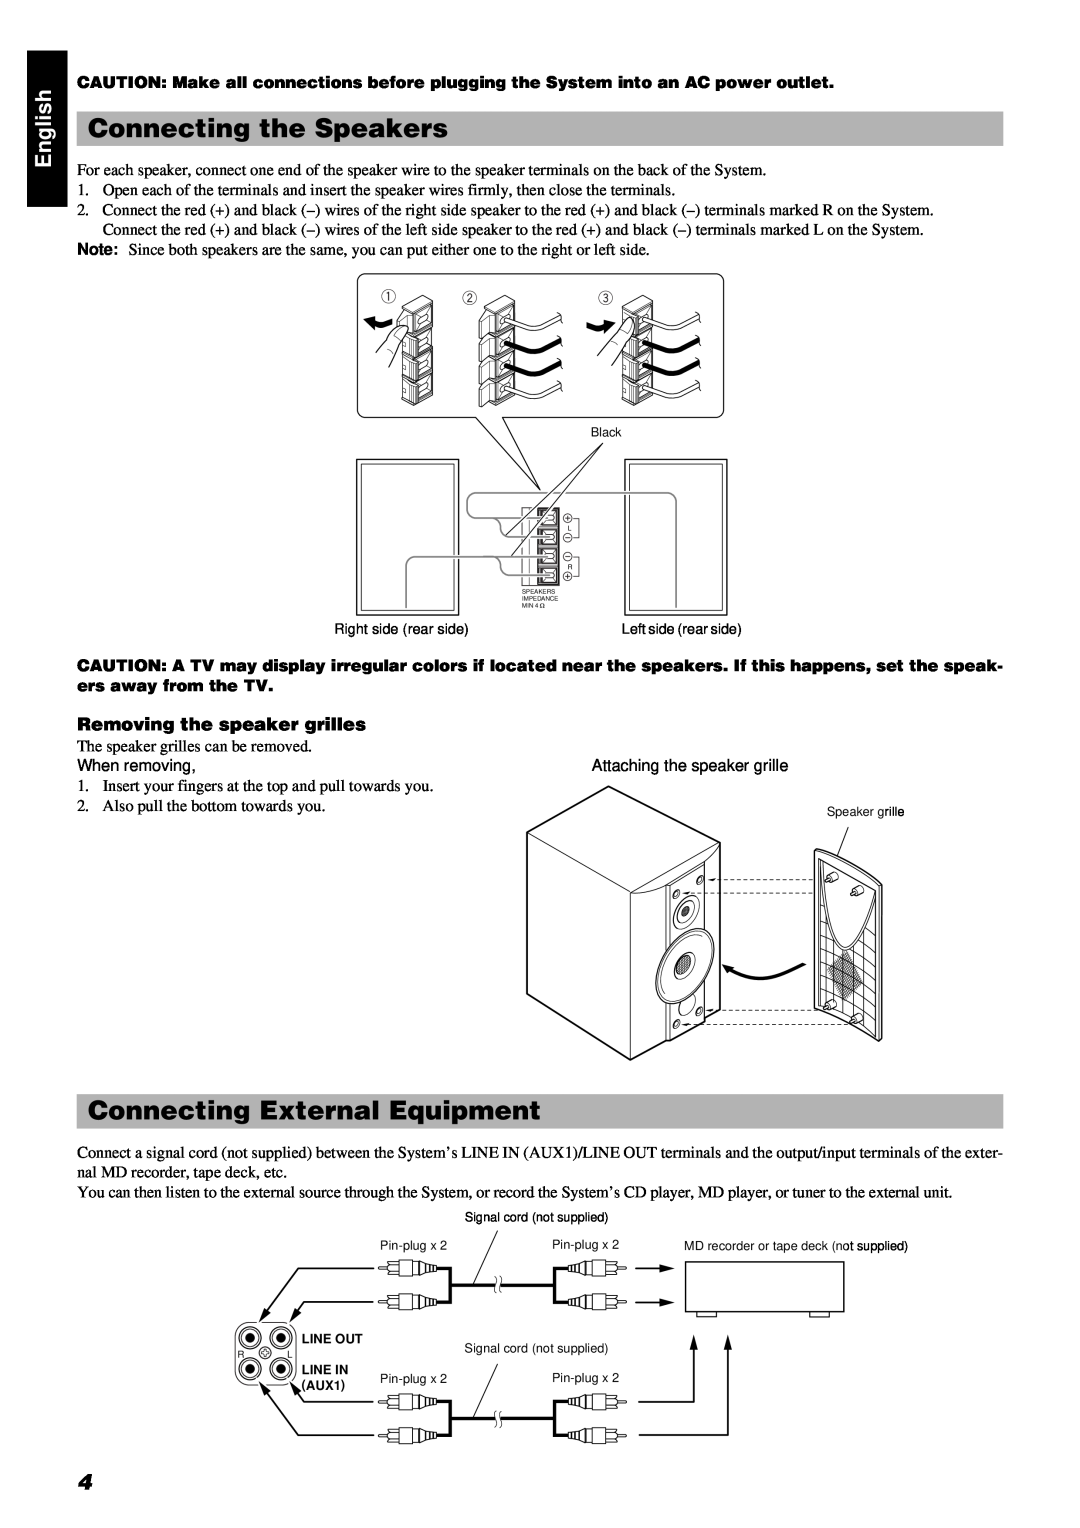 JVC RM-RXUV9RMD manual Connecting the Speakers, Connecting External Equipment, Removing the speaker grilles, English 